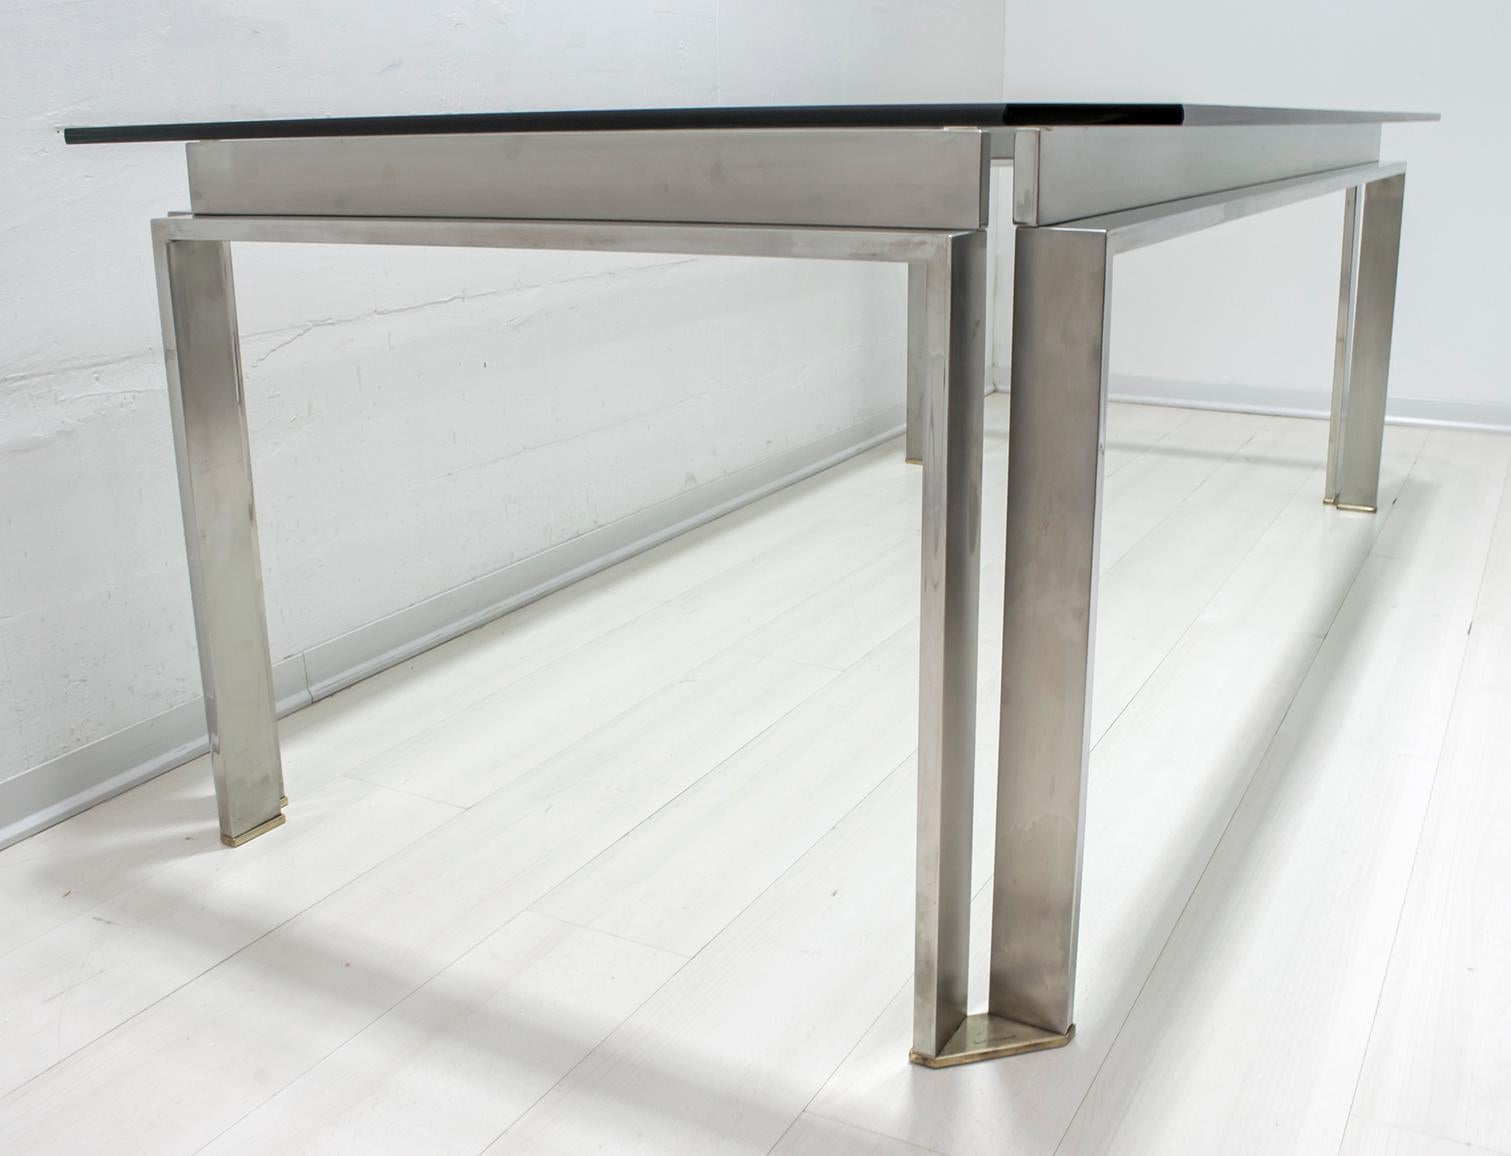 Late 20th Century Dada Industrial Design Mid-Century Modern Italian Steel Dining Table, 1970s For Sale